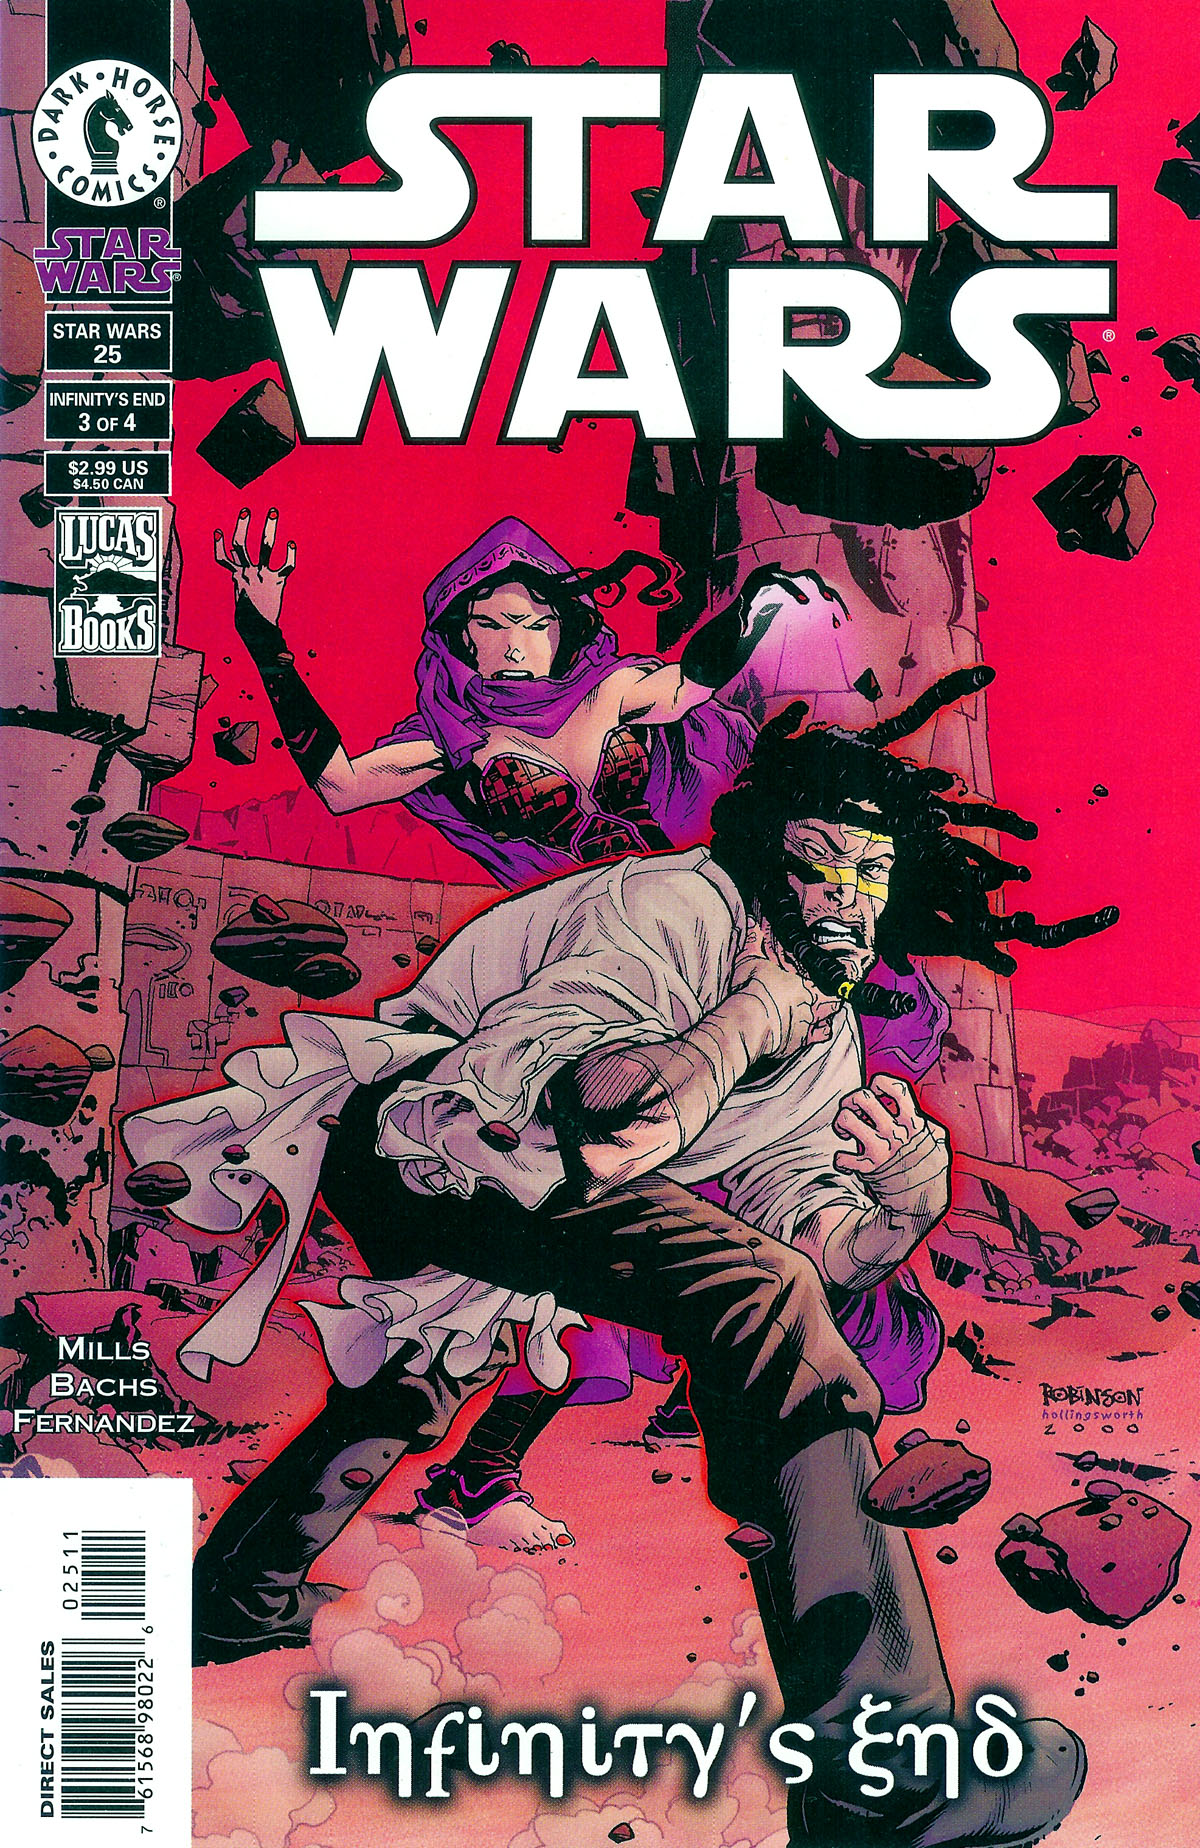 Star Wars 23: Infinity's End, Part 3